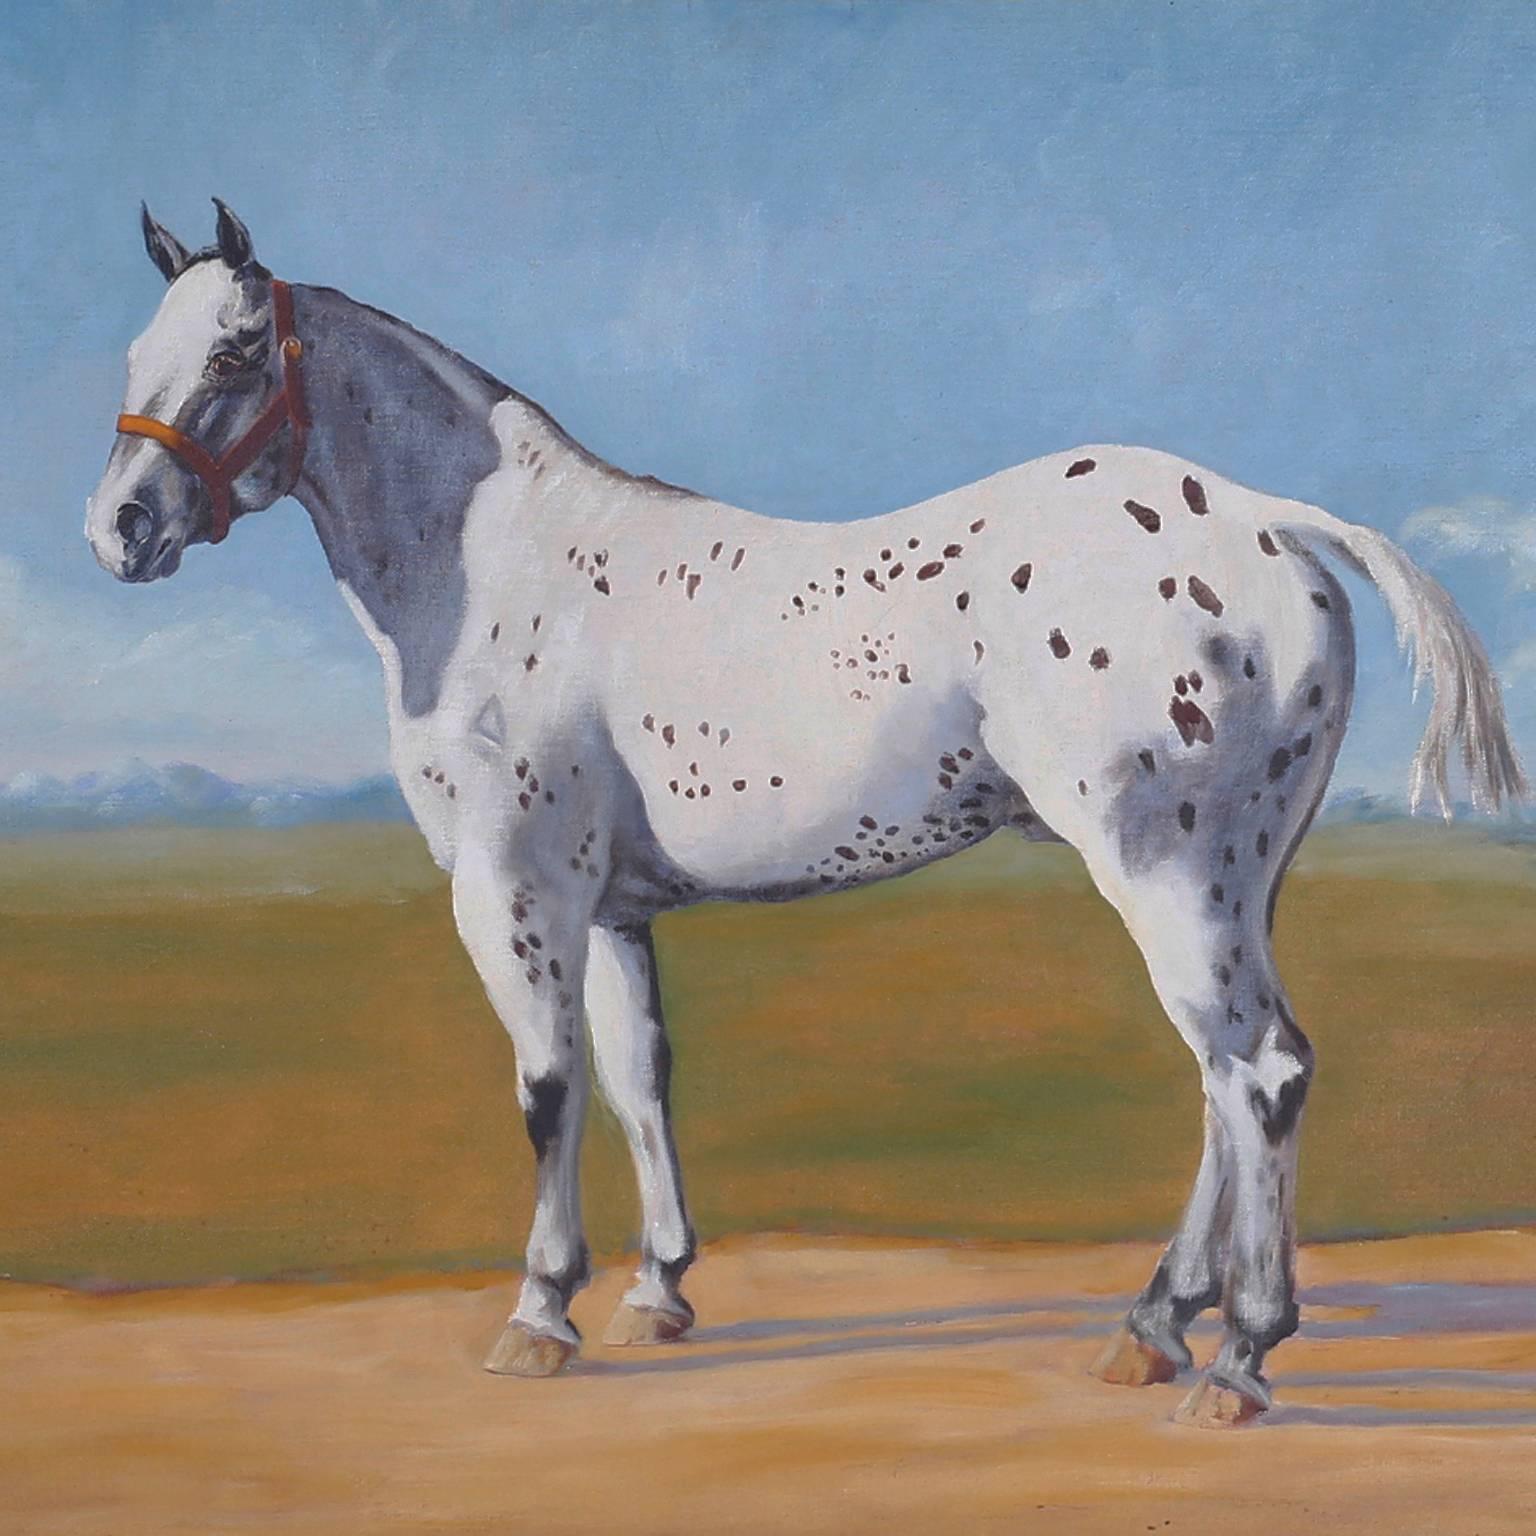 Oil painting of a horse or appaloosa against a blue sky and western landscape. Expertly painted in a bold modern style. This painting is of famed reference Appaloosa sire Joker B., and was painted directly from a photograph taken of him. Note, the